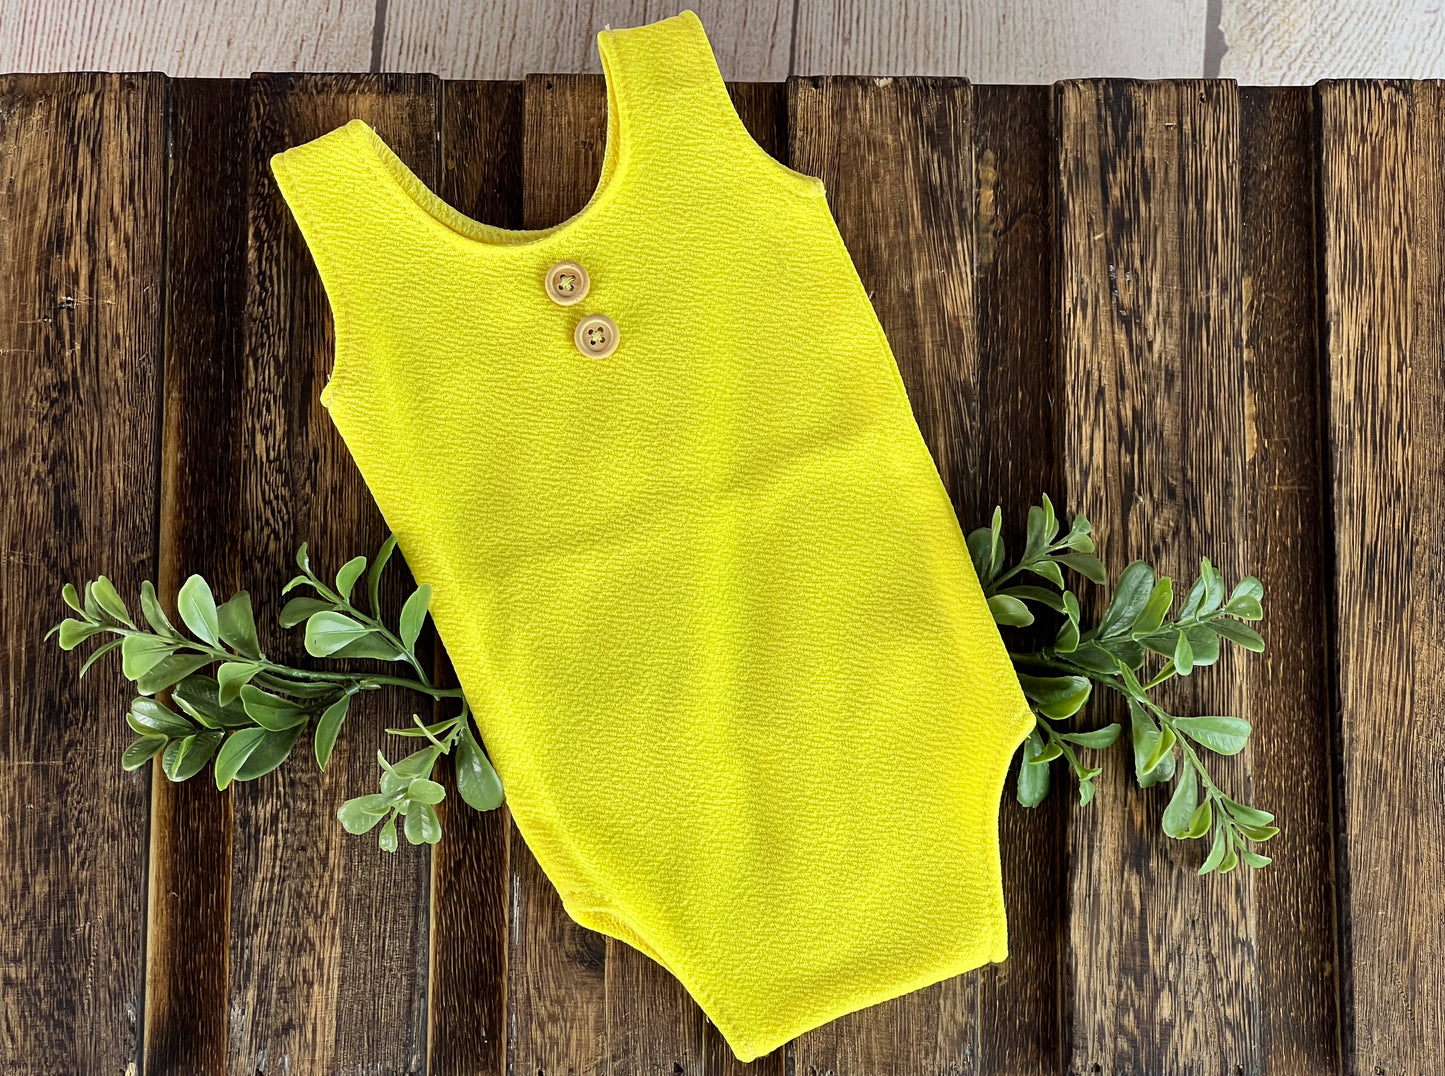 Sleeveless Stitch Romper- Textured - Yellow (AS IS ITEM)